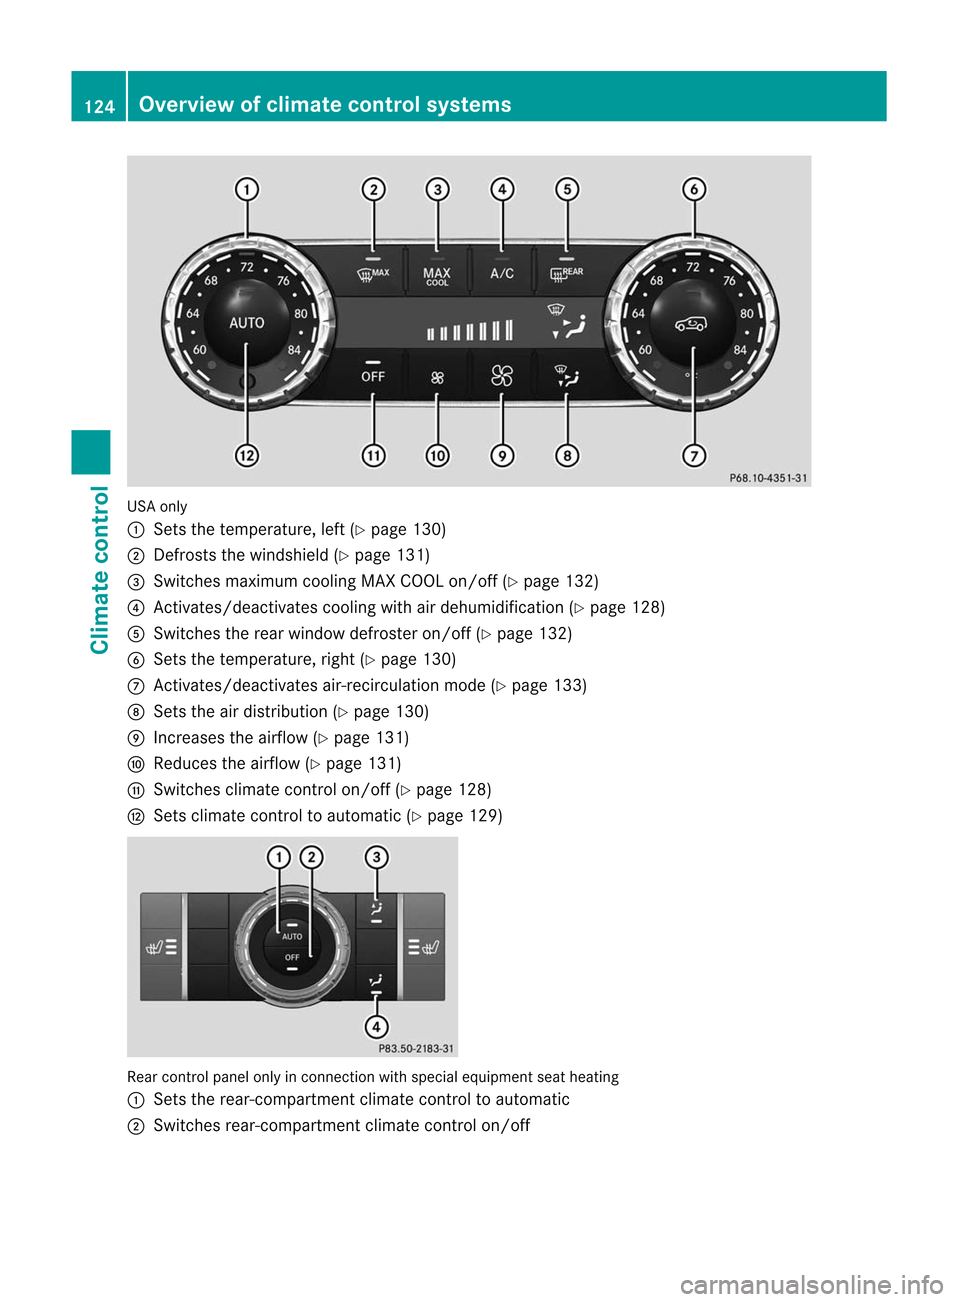 MERCEDES-BENZ M-Class 2012 W166 Owners Manual 
USA
only
: Sets thetemperature, left(Ypage 130)
; Defrosts thewindshiel d(Y page 131)
= Switches maximum coolingMAXCOOL on/off (Ypage 132)
? Activates/deactivates coolingwithairdehumid ification(Ypag